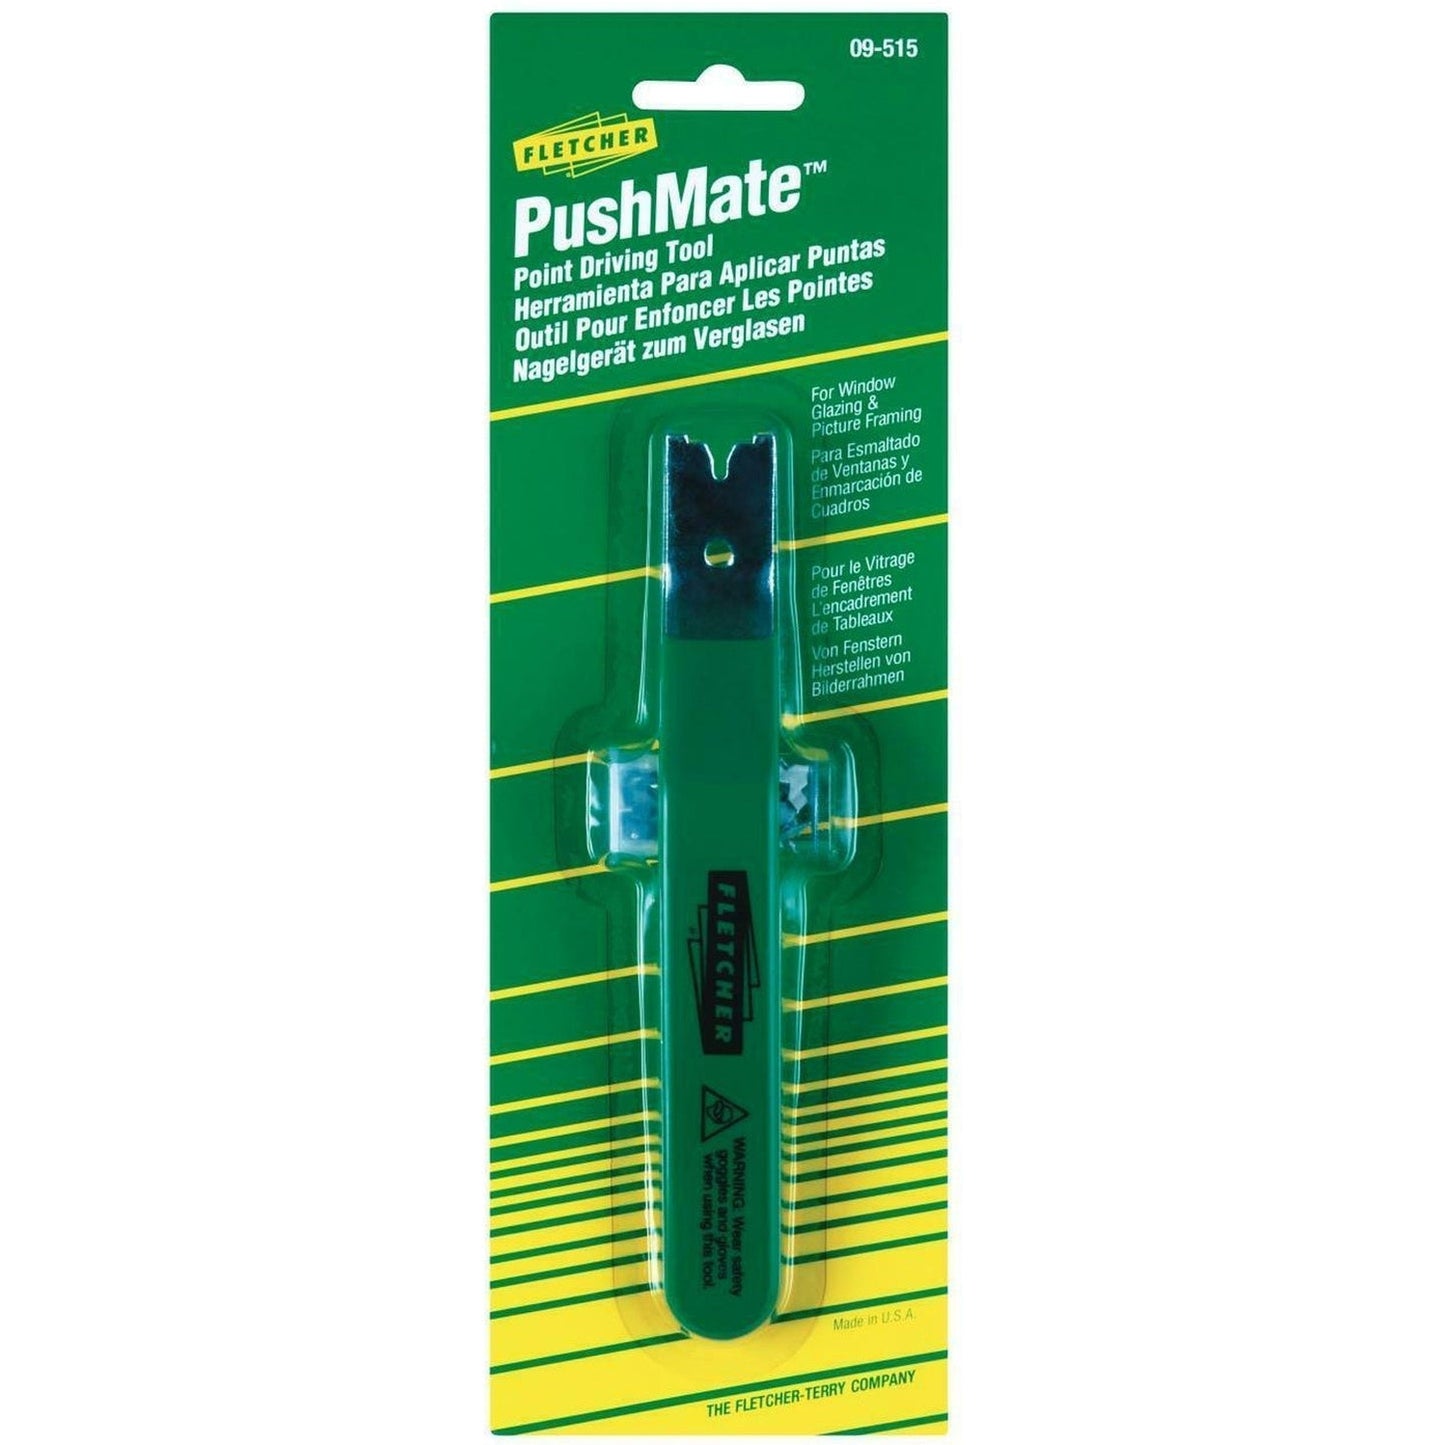 Fletcher 09-515 PushMate Push Point Driving Tool & 30 Points